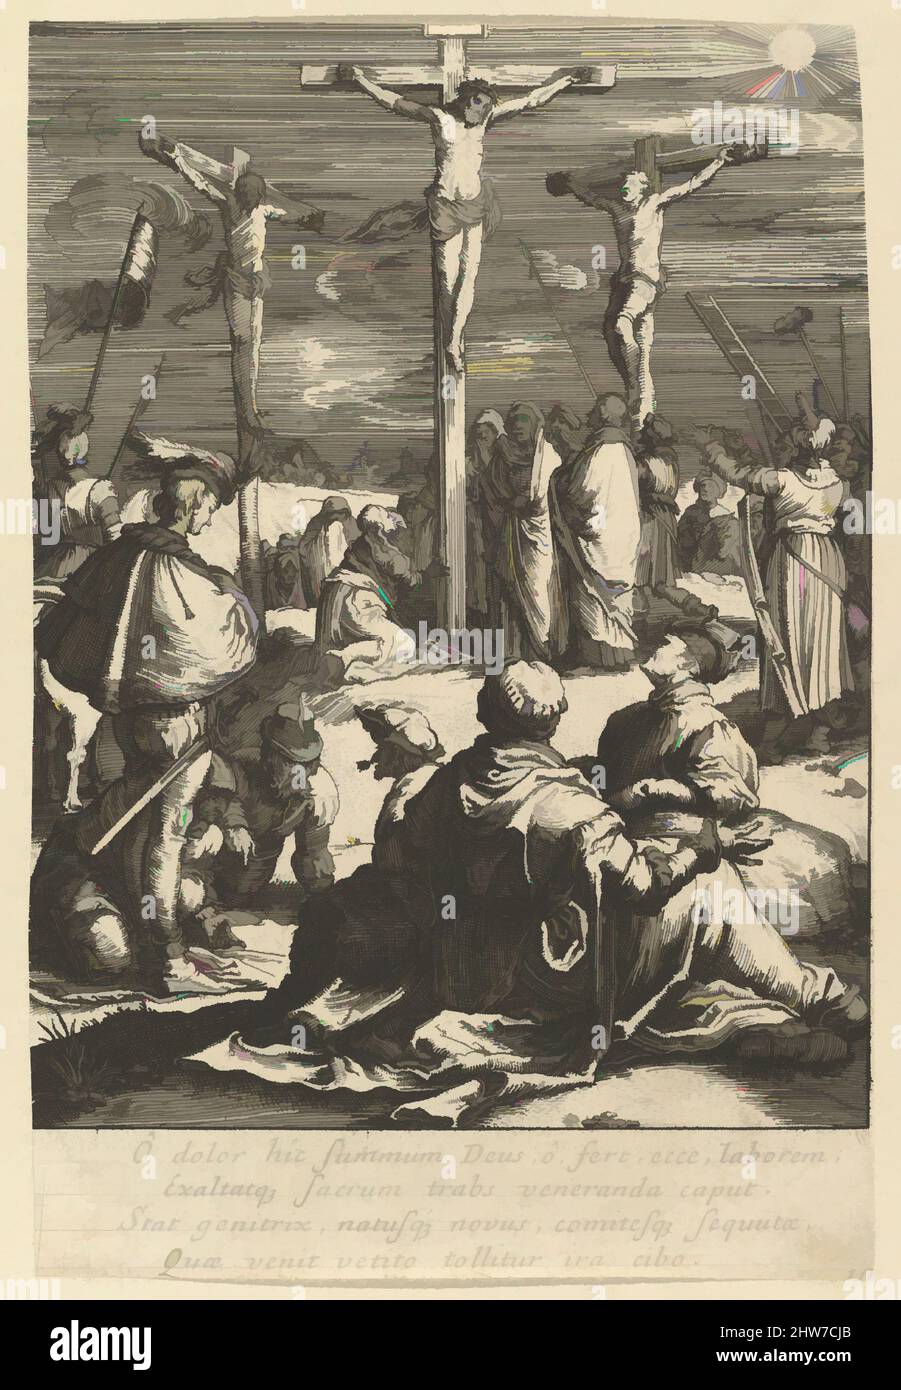 Art inspired by Christ on the Cross, from The Passion of Christ, mid 17th century, Etching, Sheet: 5 3/4 x 3 7/8 in. (14.6 x 9.8 cm), Prints, Nicolas Cochin (French, Troyes 1610–1686 Paris), After Hendrick Goltzius (Netherlandish, Mühlbracht 1558–1617 Haarlem, Classic works modernized by Artotop with a splash of modernity. Shapes, color and value, eye-catching visual impact on art. Emotions through freedom of artworks in a contemporary way. A timeless message pursuing a wildly creative new direction. Artists turning to the digital medium and creating the Artotop NFT Stock Photo